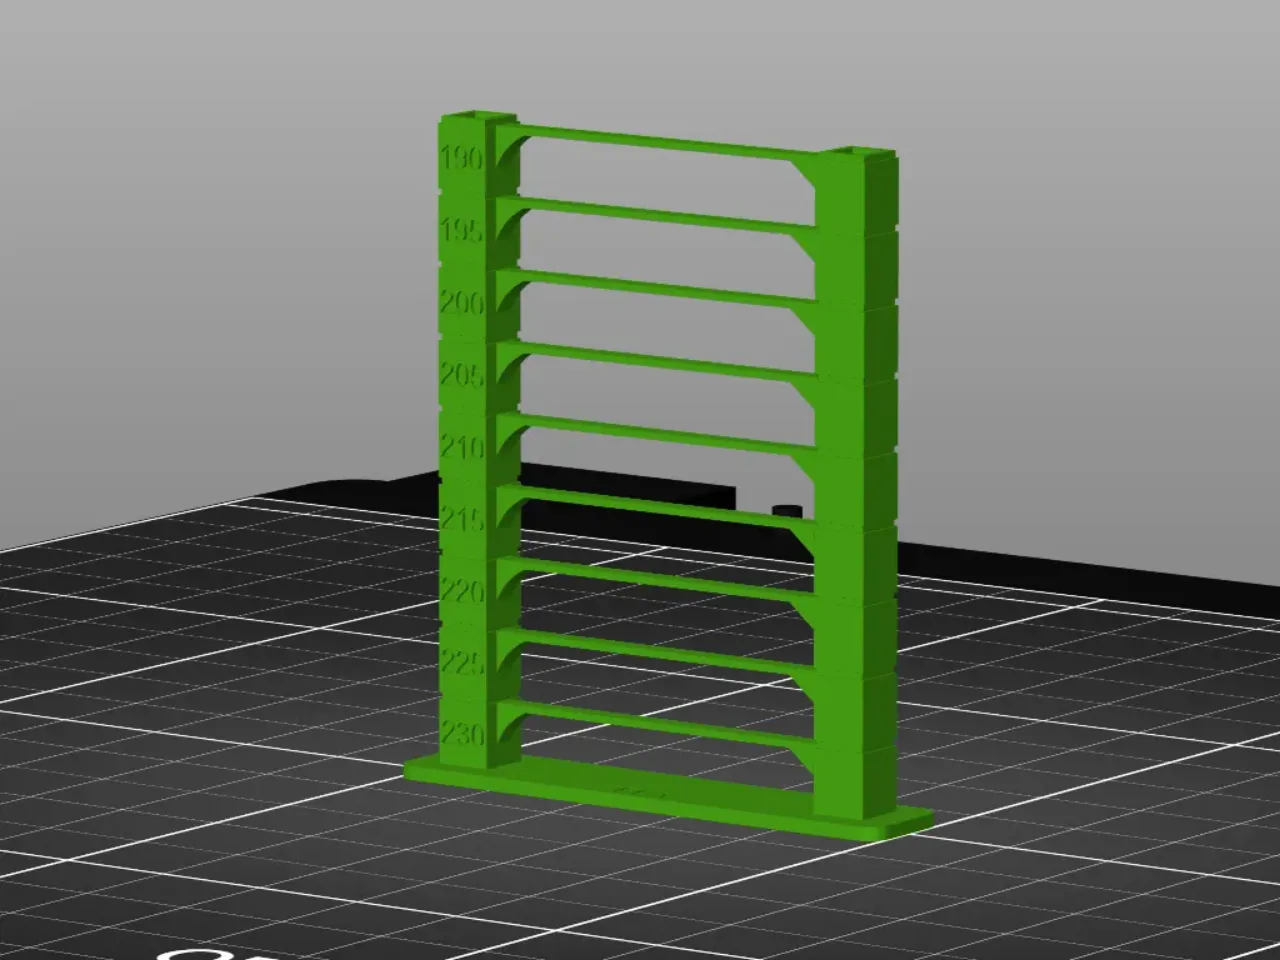 Tetra Tower For Prusa Mini by emmgr23